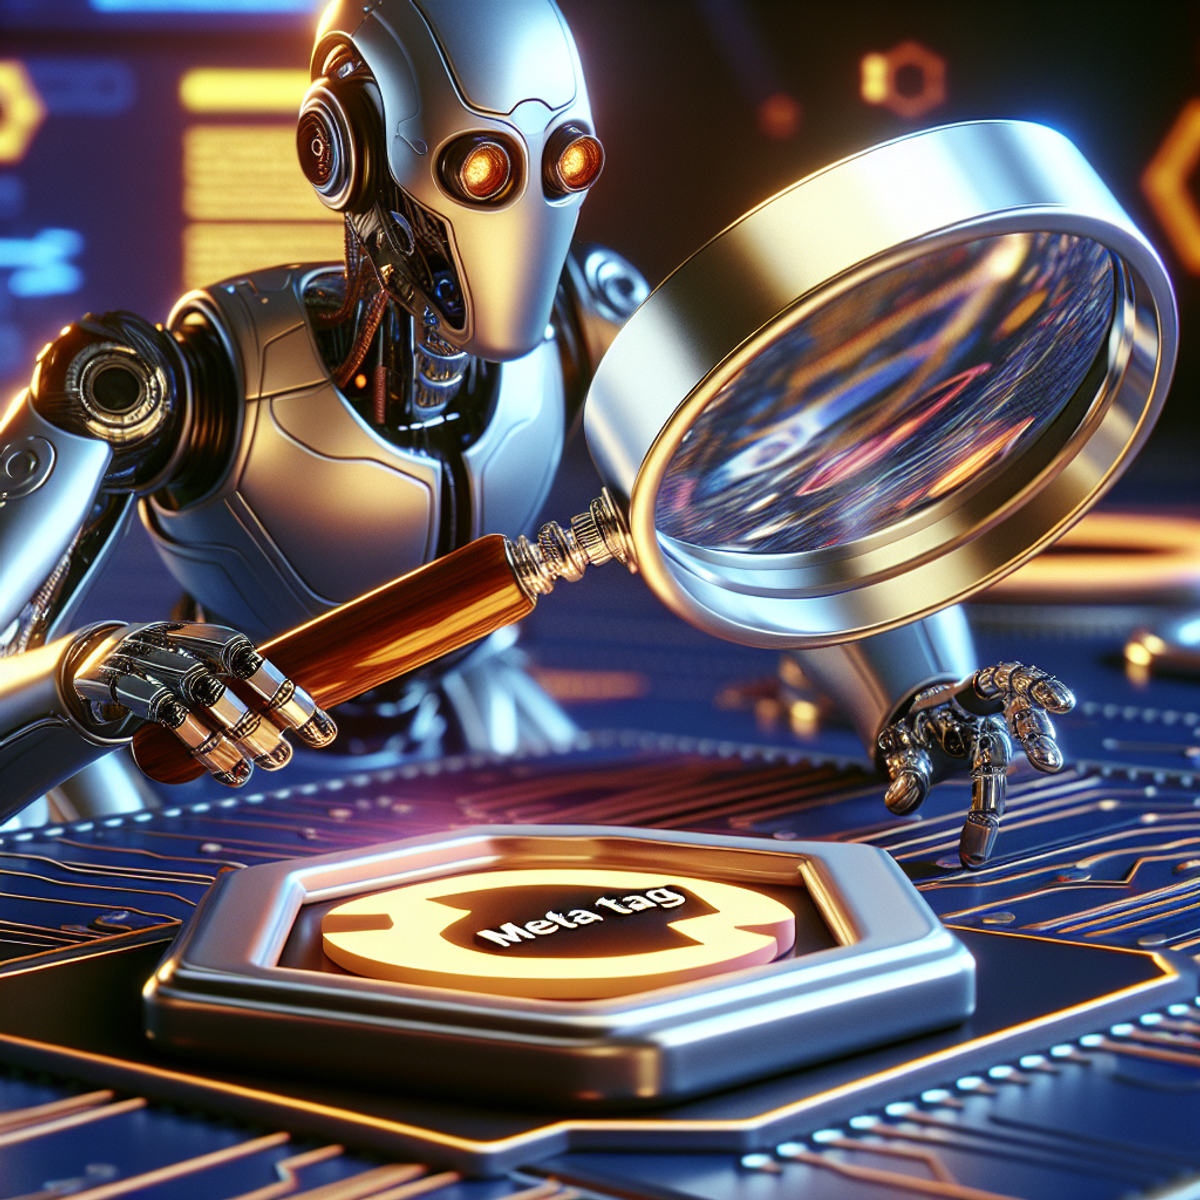 A futuristic robot with metallic skin and advanced tools uses a clear magnifying glass to examine a conceptual meta tag token in a high-tech environment.